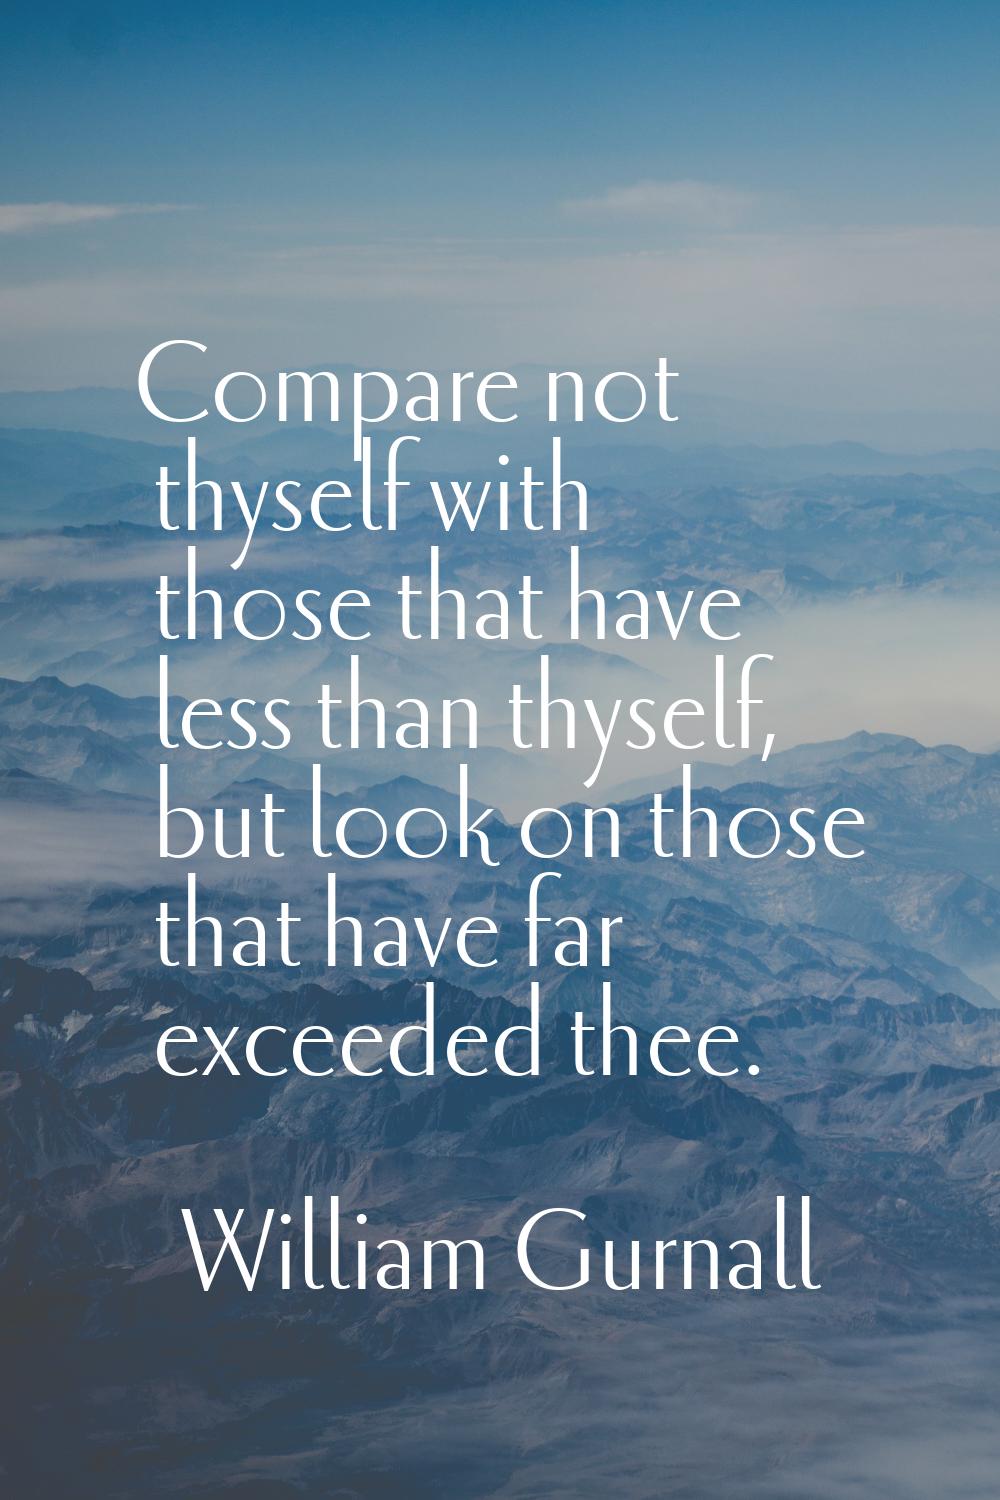 Compare not thyself with those that have less than thyself, but look on those that have far exceede